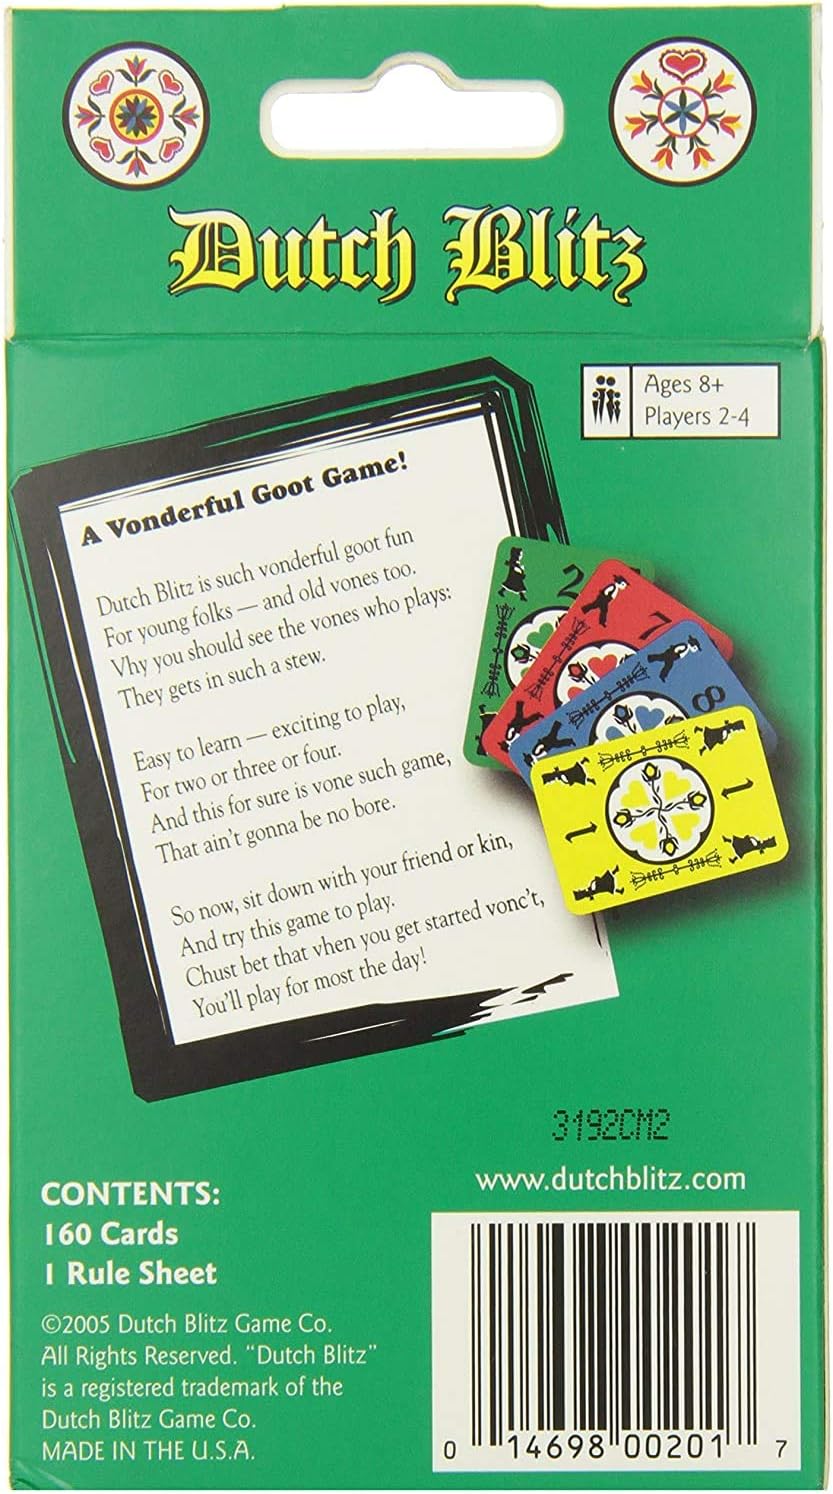 - Fast Paced Card Game for 2-4 Players Ages 8+, 160 Cards, Easy to Learn